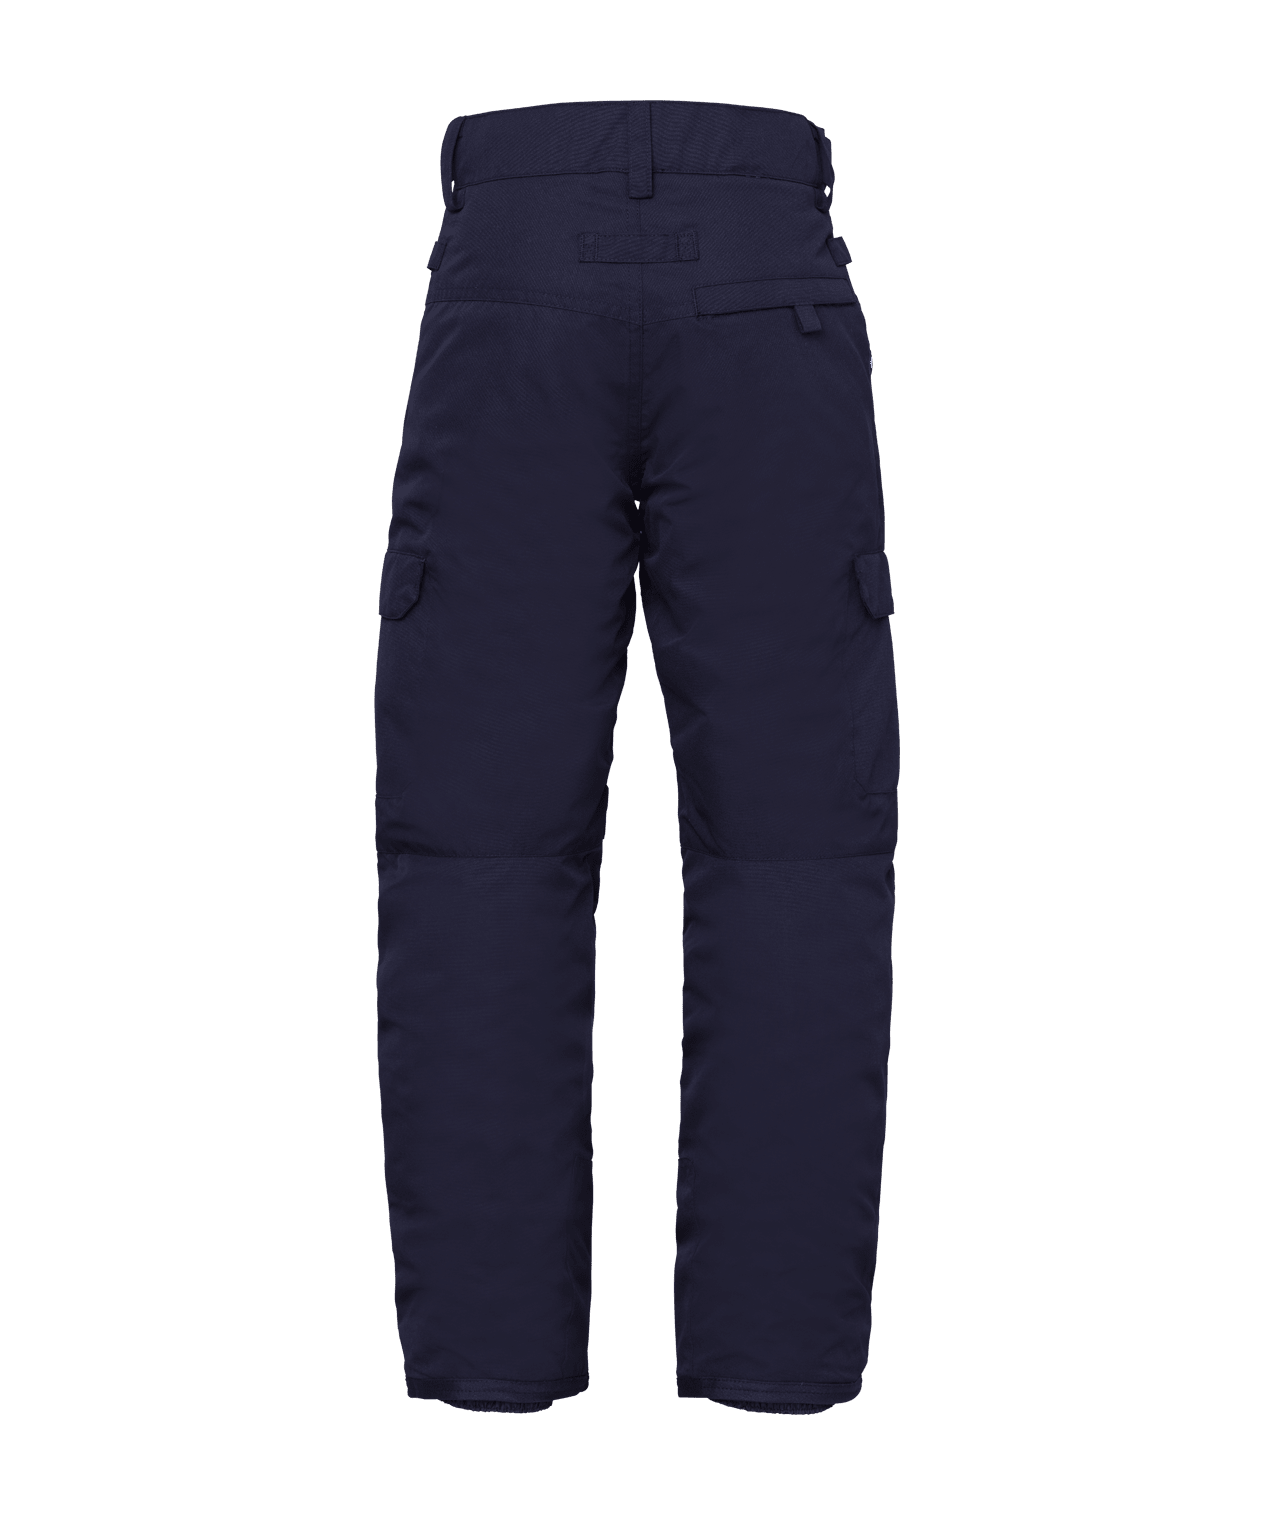 686 Youth Infinity Cargo Insulated Snow Pant Black 2024 Youth Snow Pants 686 